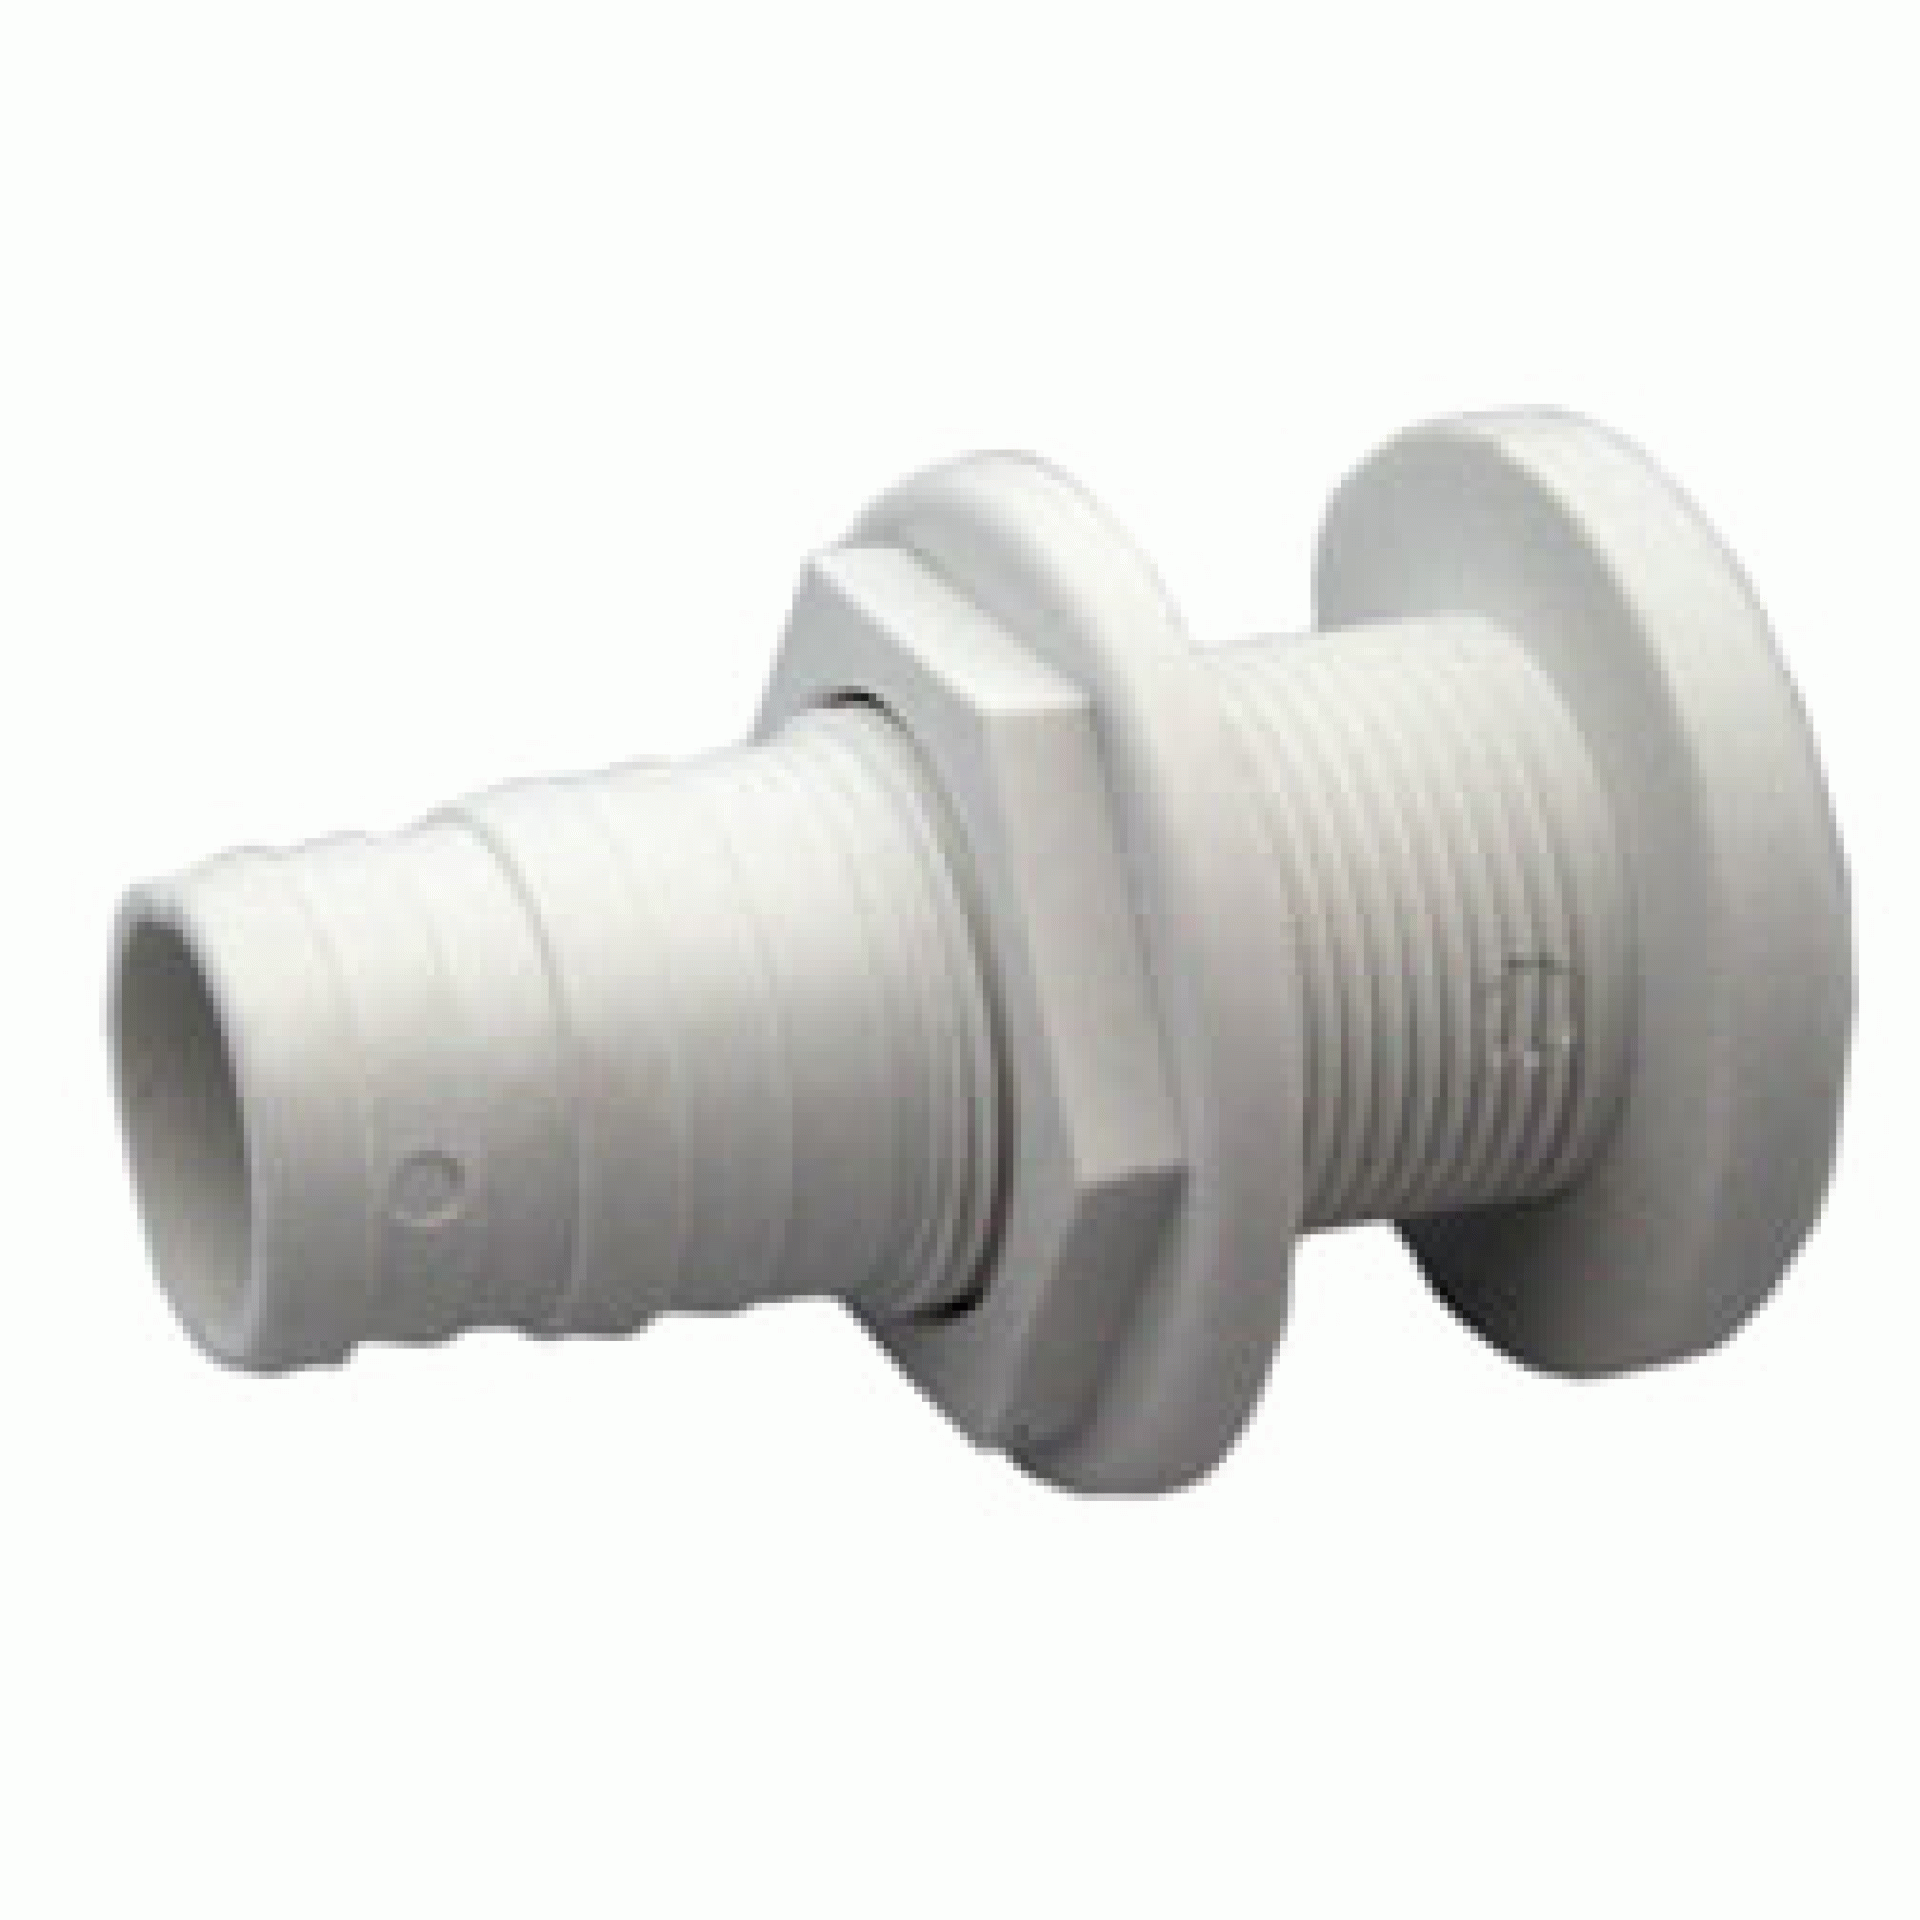 ATTWOOD CORPORATION | 3874-3 | THRU-HULL CONNECTORS - FOR 1-1/8" TO 1-1/4" HOSE SIZE; SKIN PACK